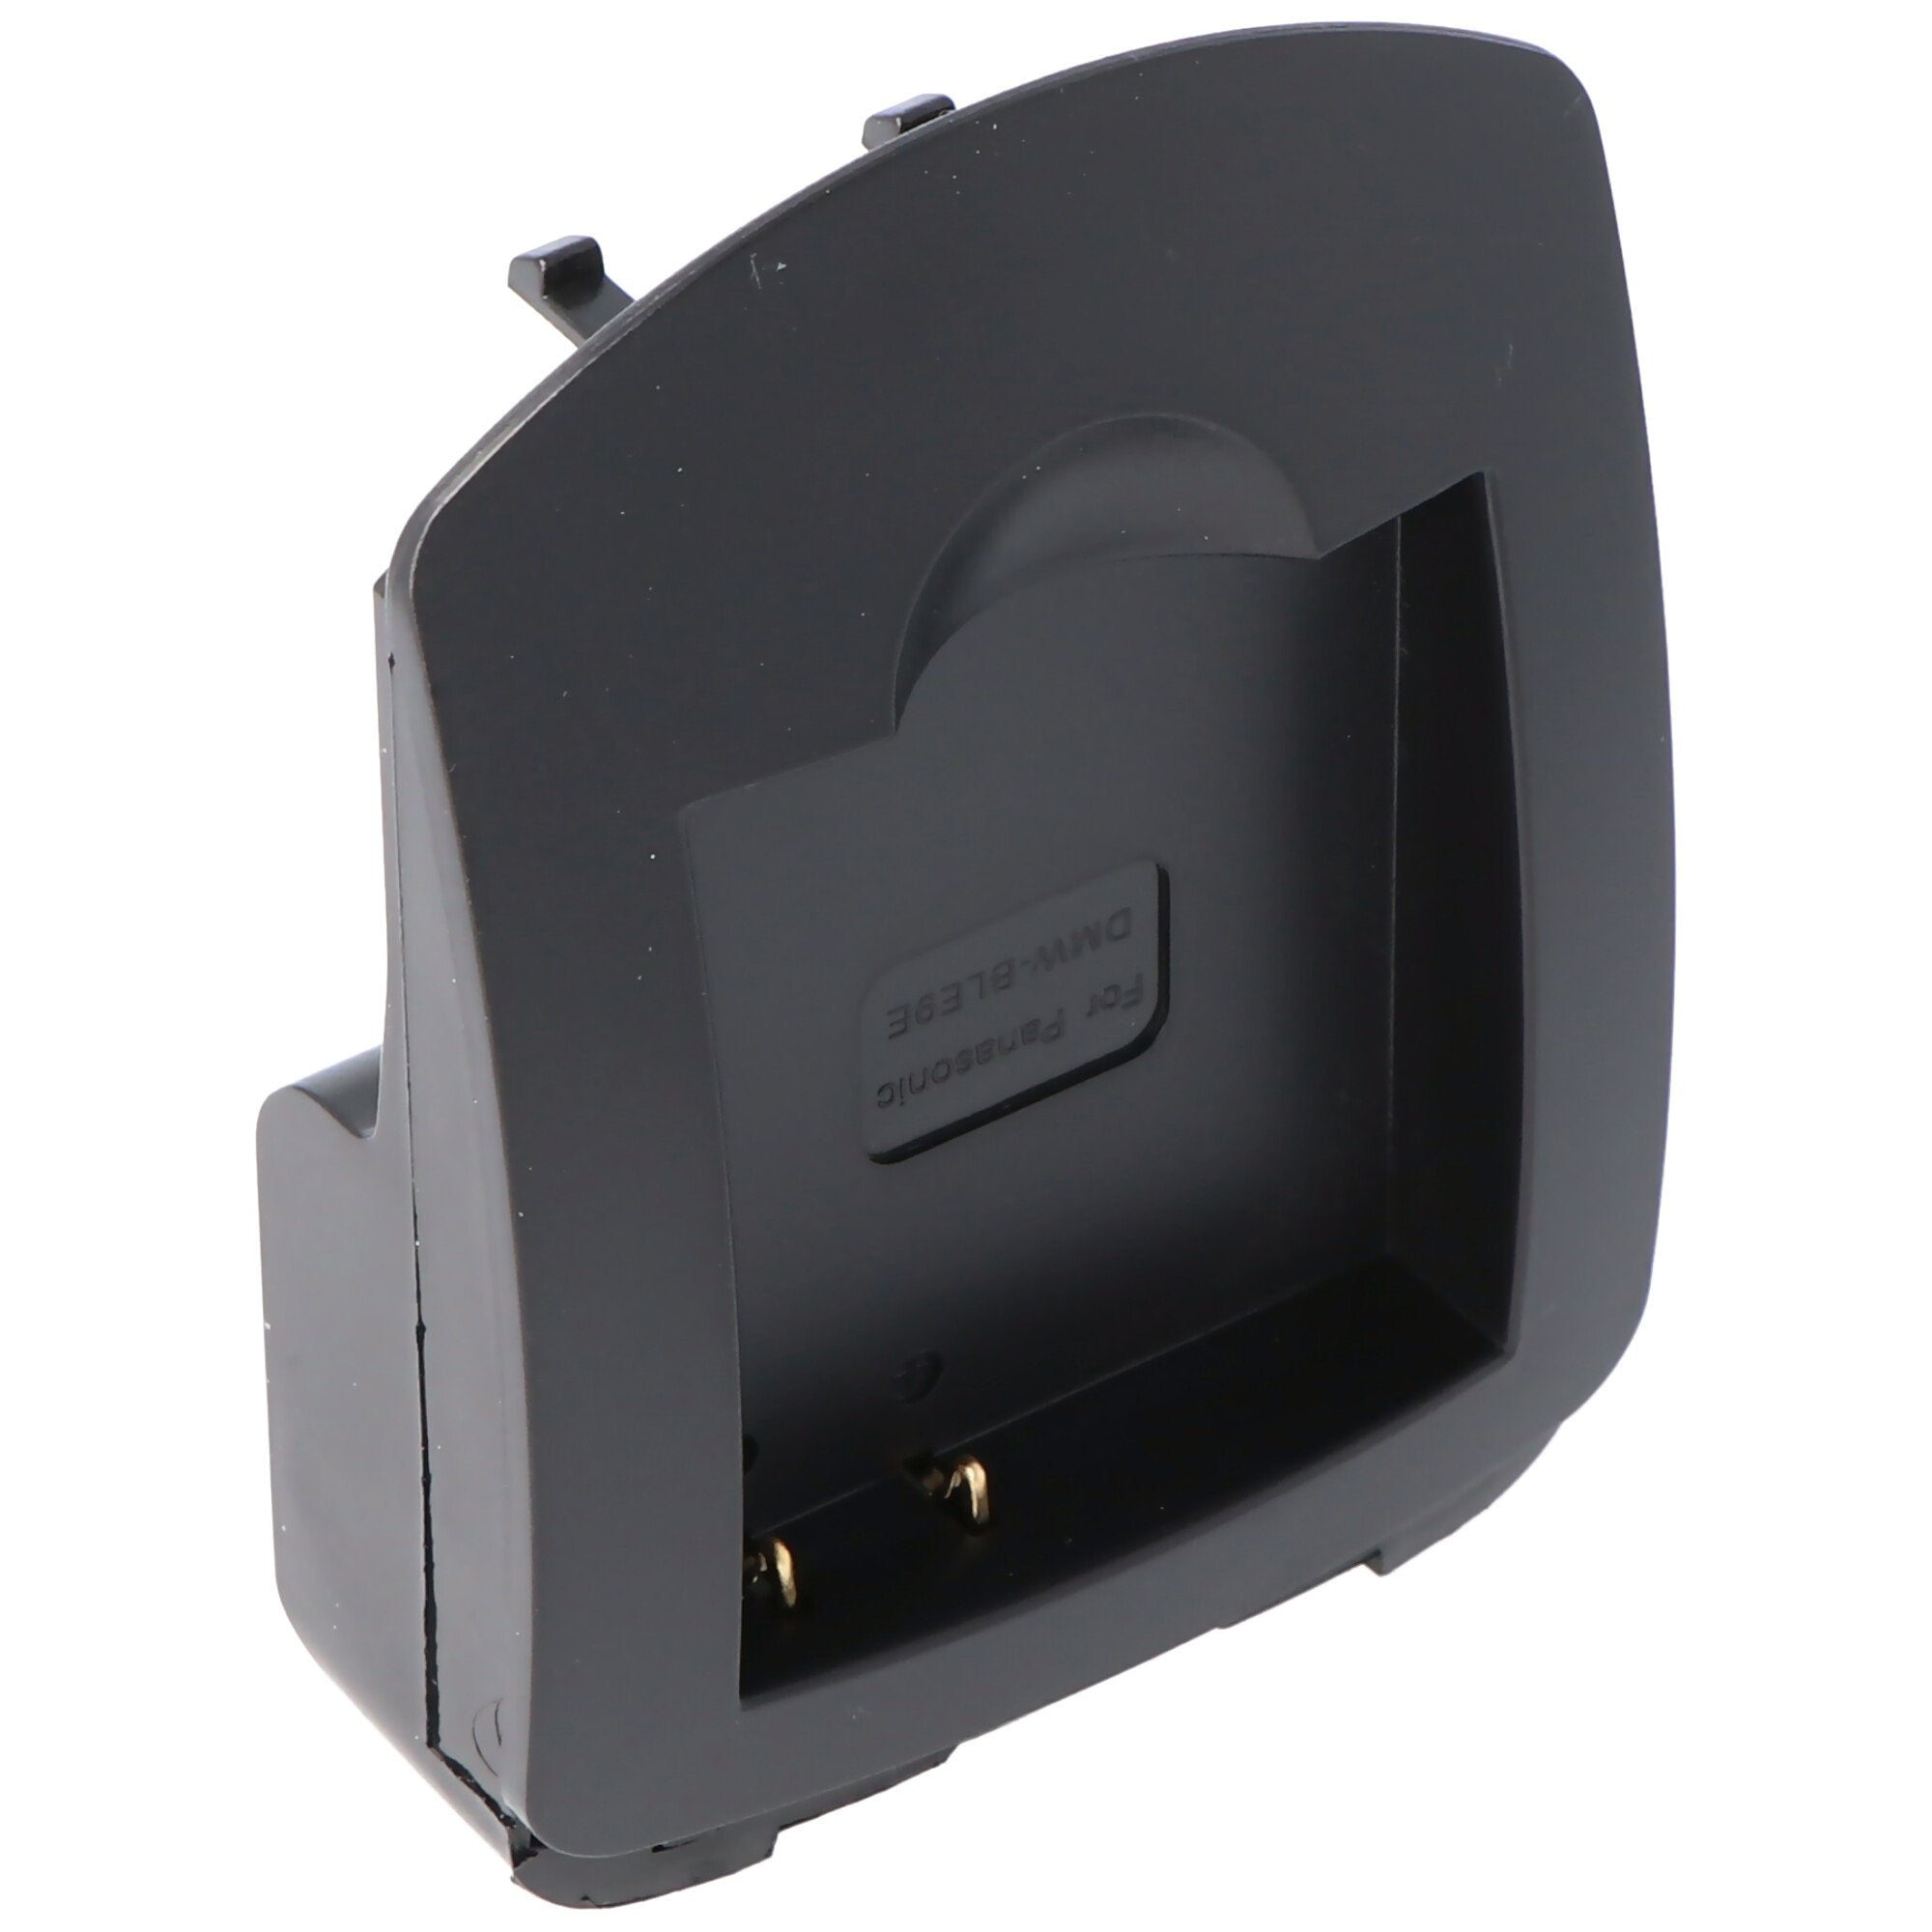 Quick charger suitable for Panasonic DMW-BLE9, DMW-BLE9E, DMW-BLE9GK, DMW-BLE9PP, DMW-BLG10, DMW-BLG